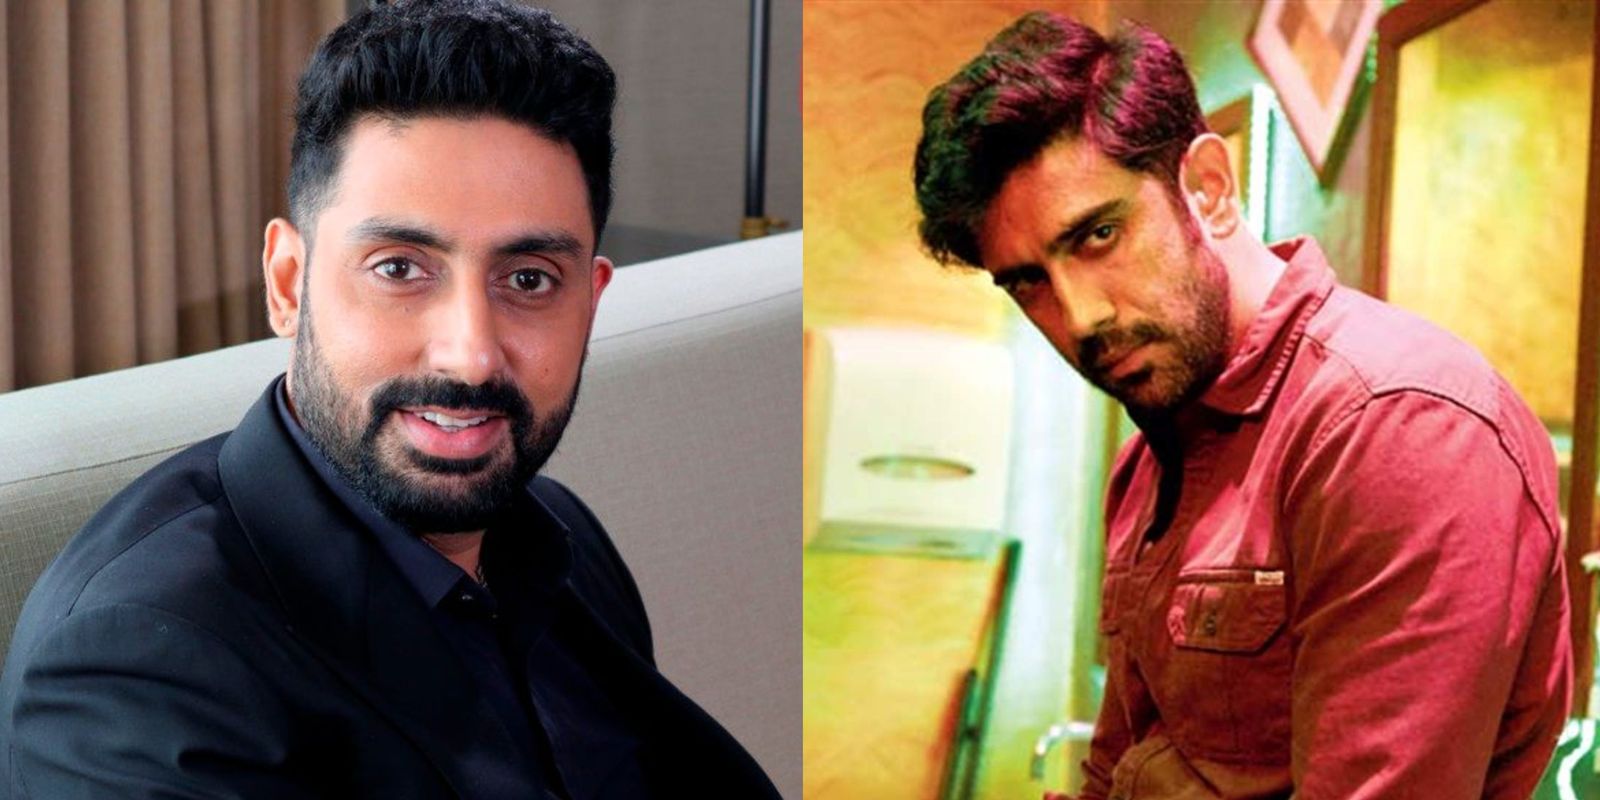 Abhishek Bachchan’s Breathe: Into The Shadows Co-Star Amit Sadh Clarifies That They Never Dubbed Together